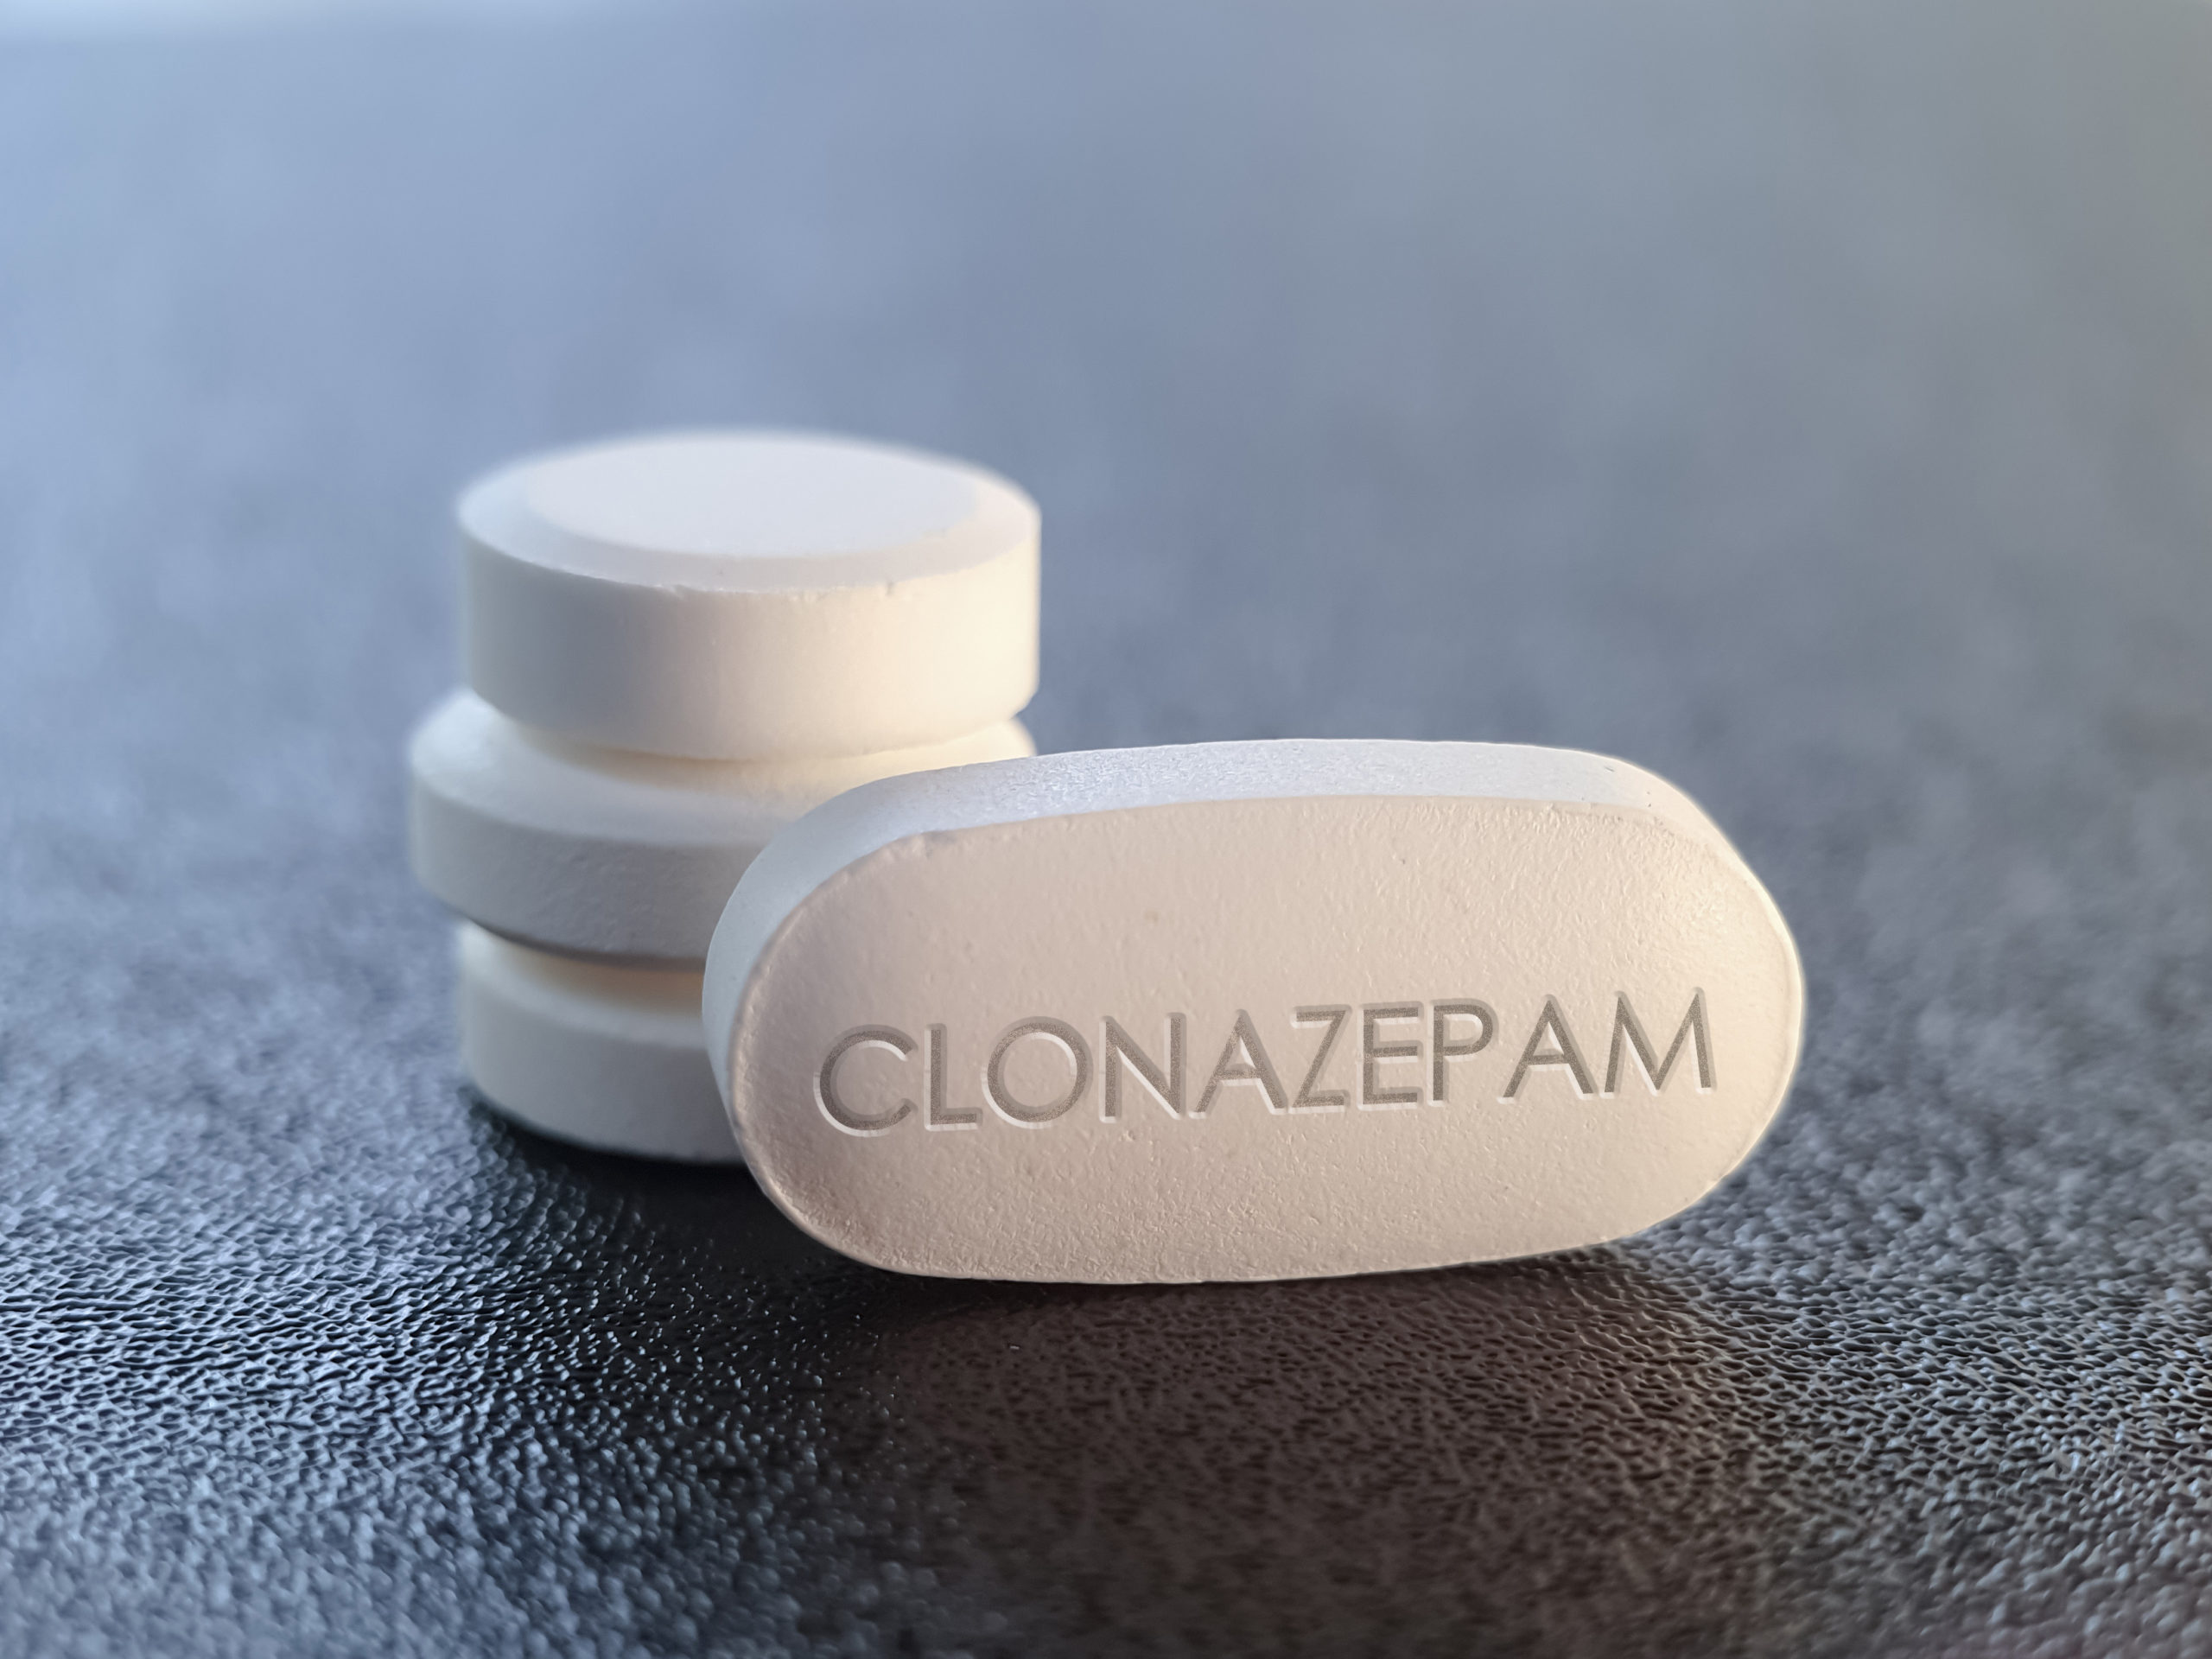 How Do You Get Addicted to Klonopin?